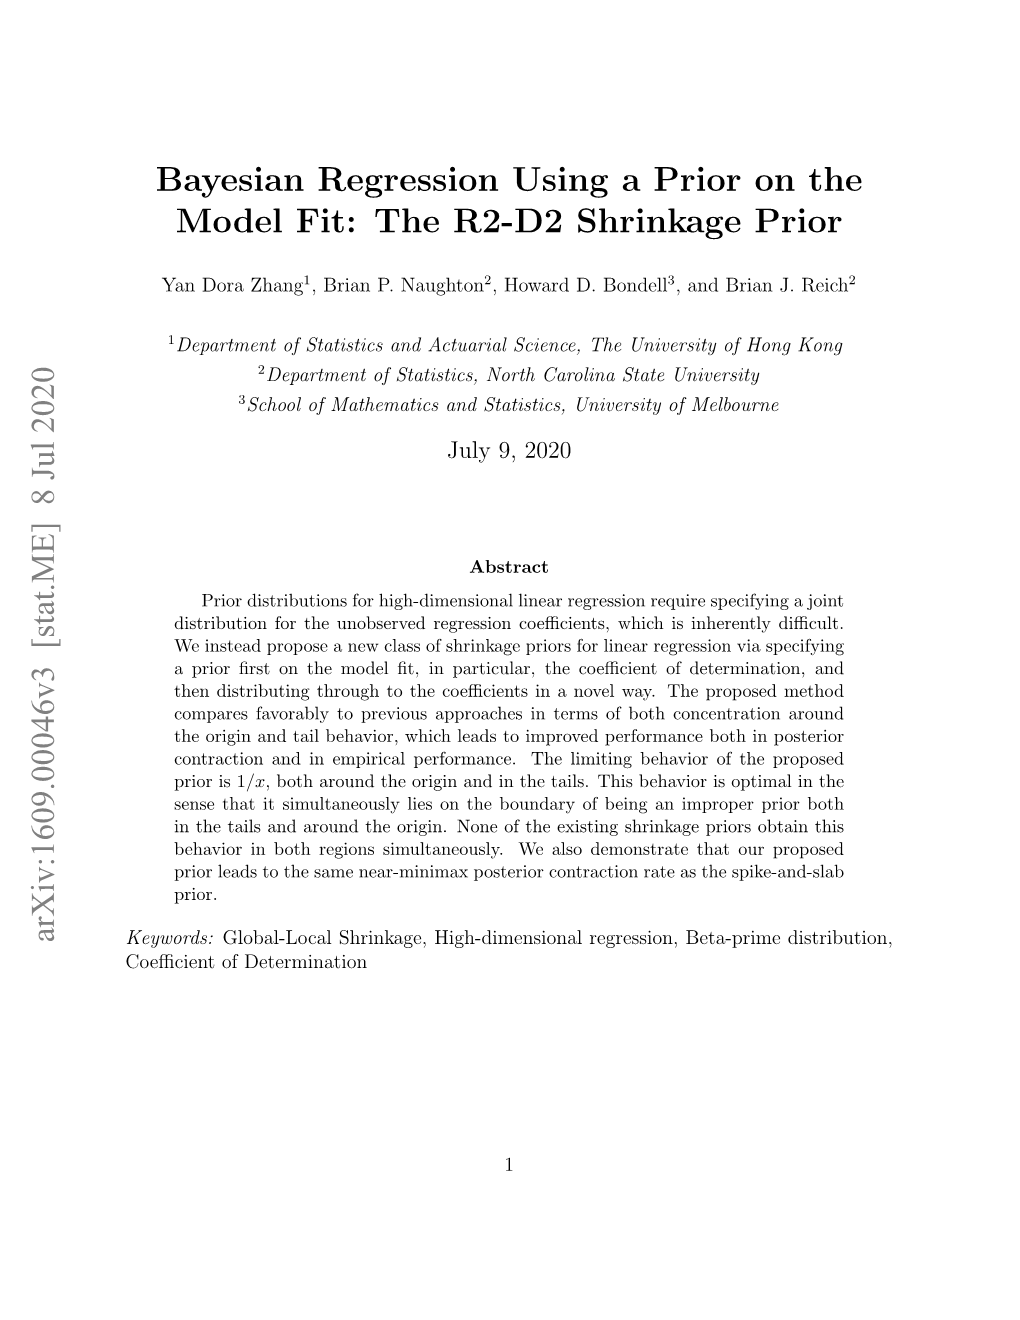 Bayesian Regression Using a Prior on the Model Fit: the R2-D2 Shrinkage Prior